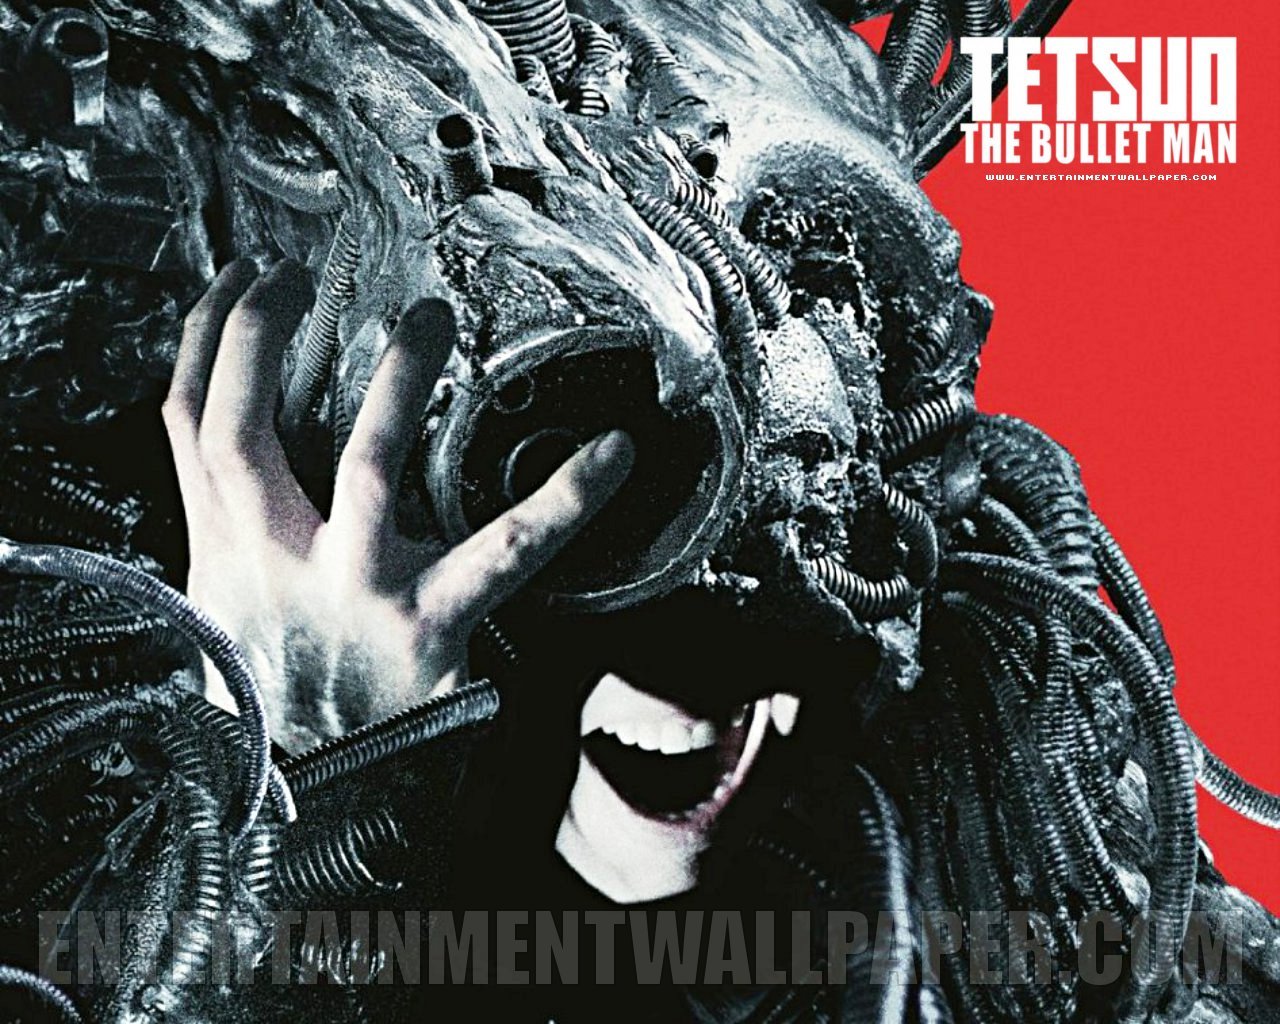 Tetsuo III: The Bullet Man Movie Cast, Stills, Poster, Wallpaper: The Bullet Man Image, Picture, Photo, Icon and Wallpaper: Ravepad place to rave about anything and everything!